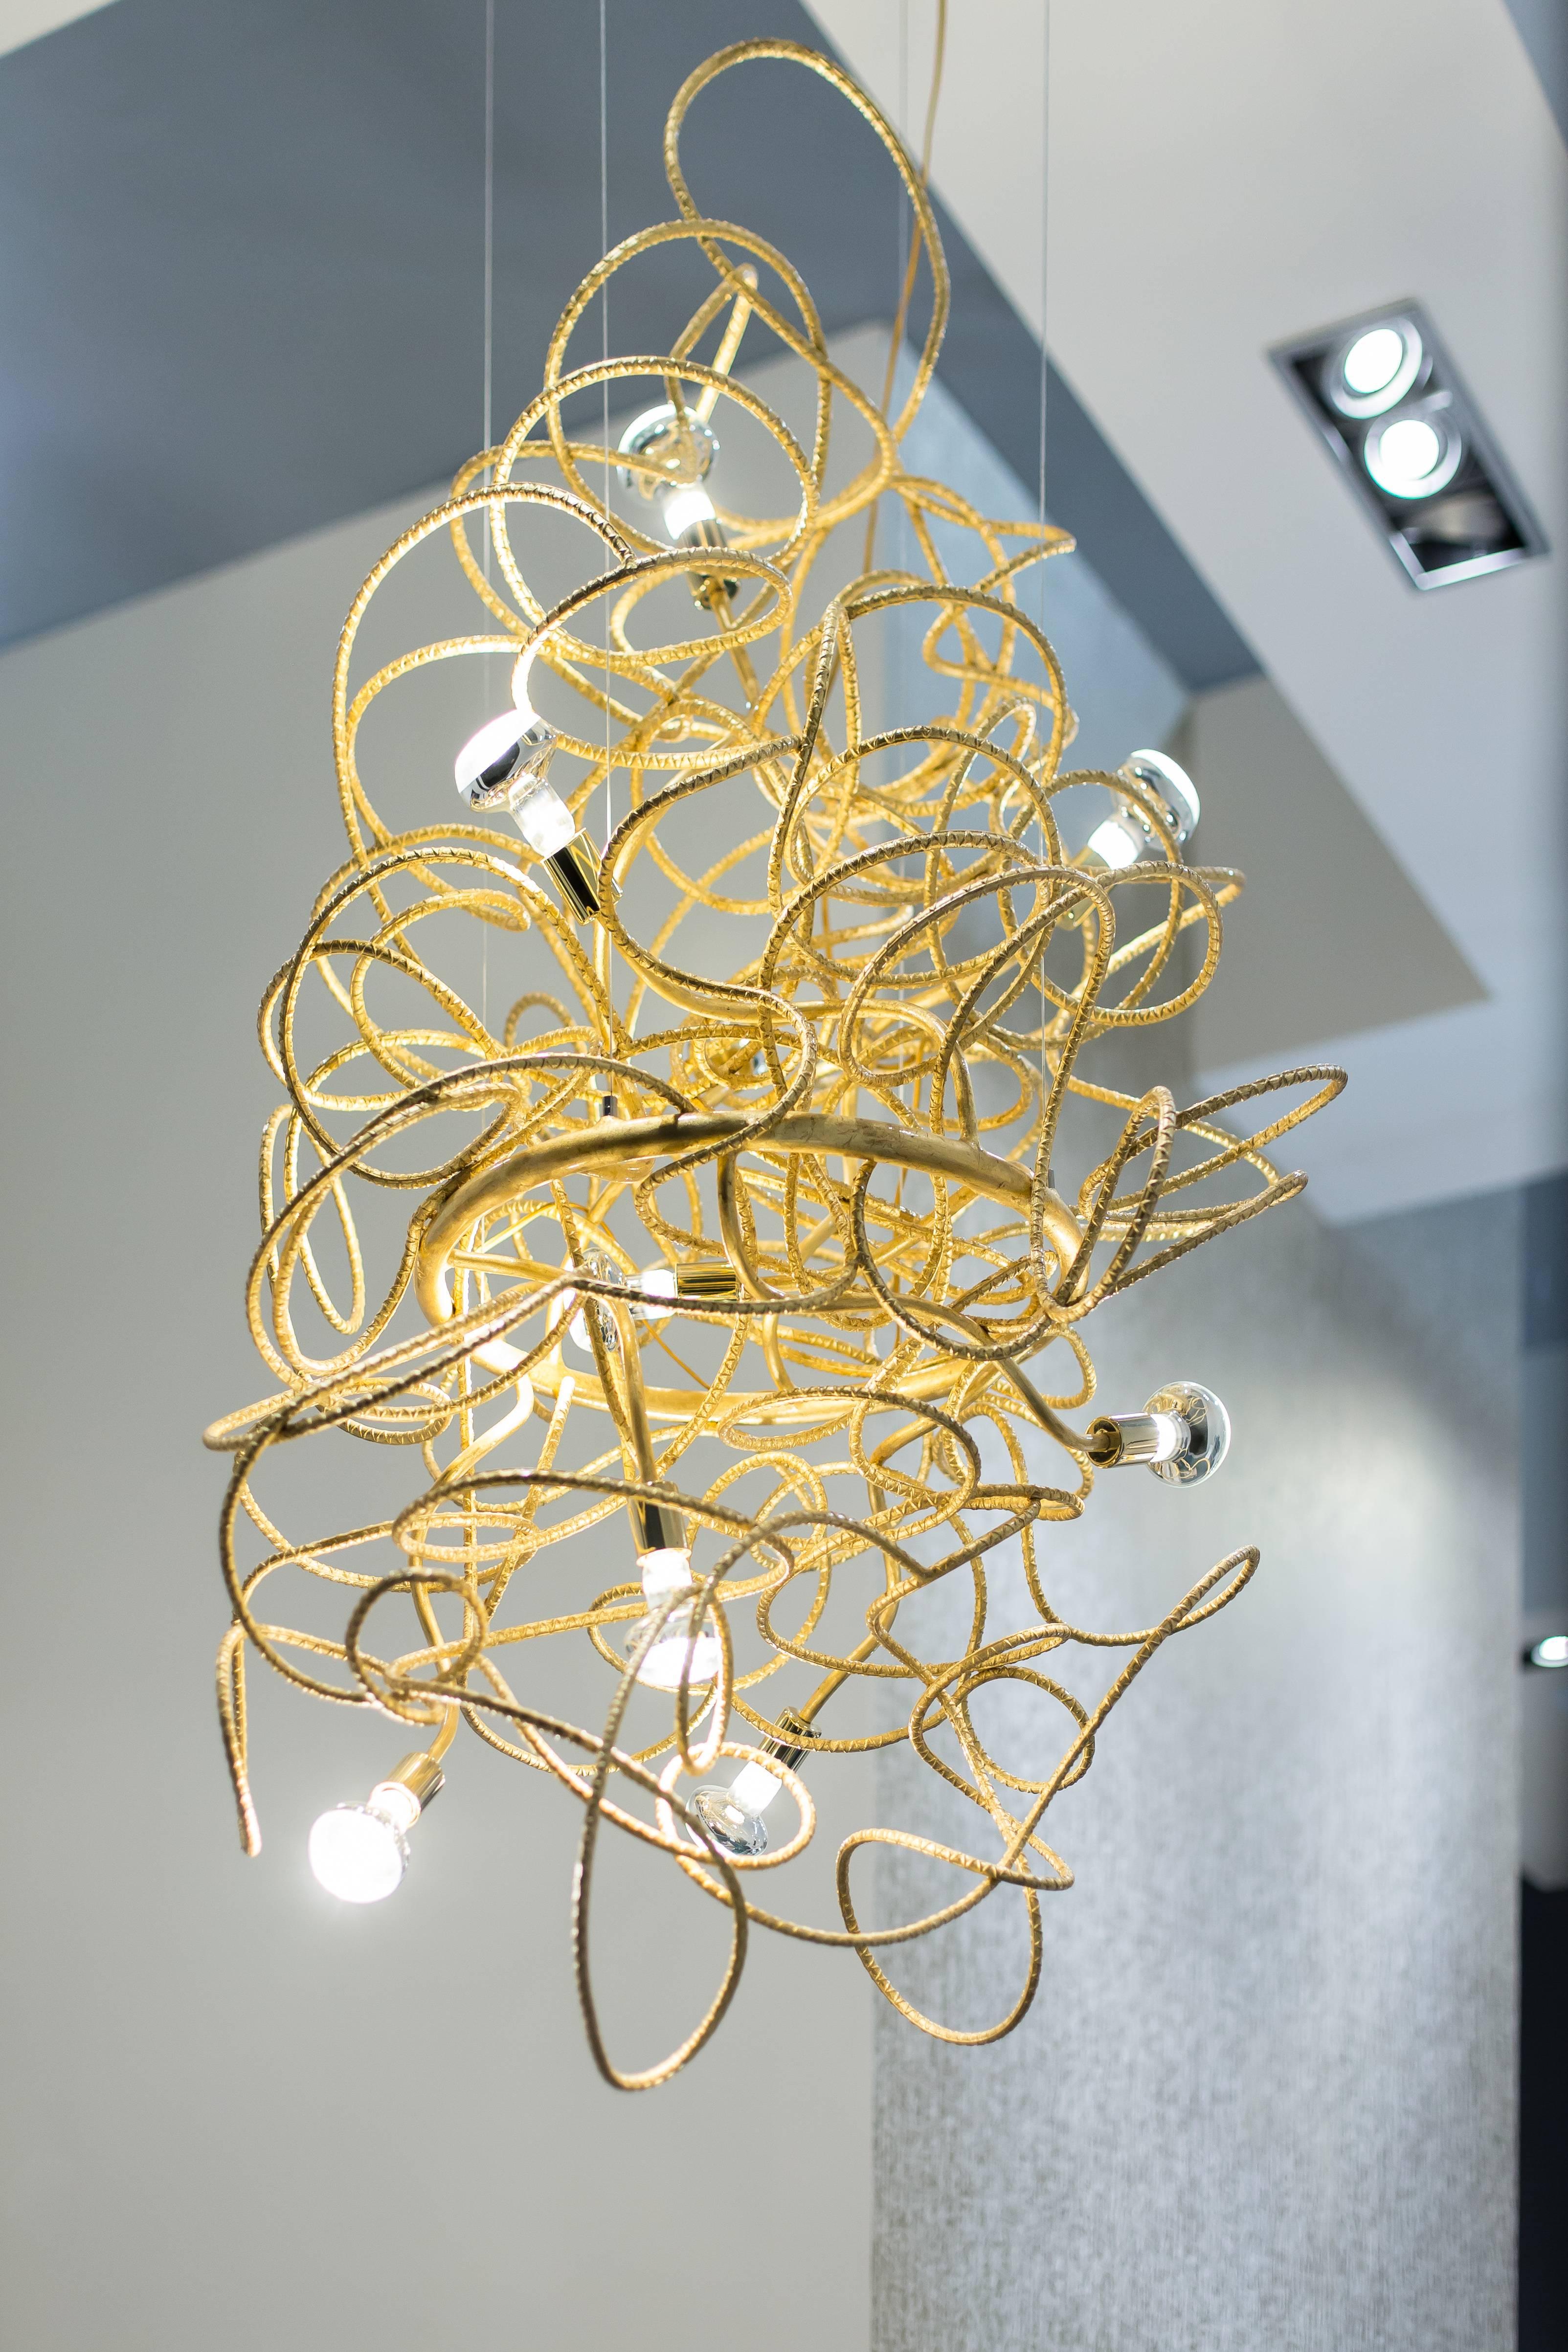 The Dax chandelier is a sculptural fete featuring gold leafed rebar hand twisted to create a unique one of a kind fixture. Polished brass and Carrara marble finish this piece off. 

Light bulbs: Nine, clear globe g25 standard base, 60 watt max